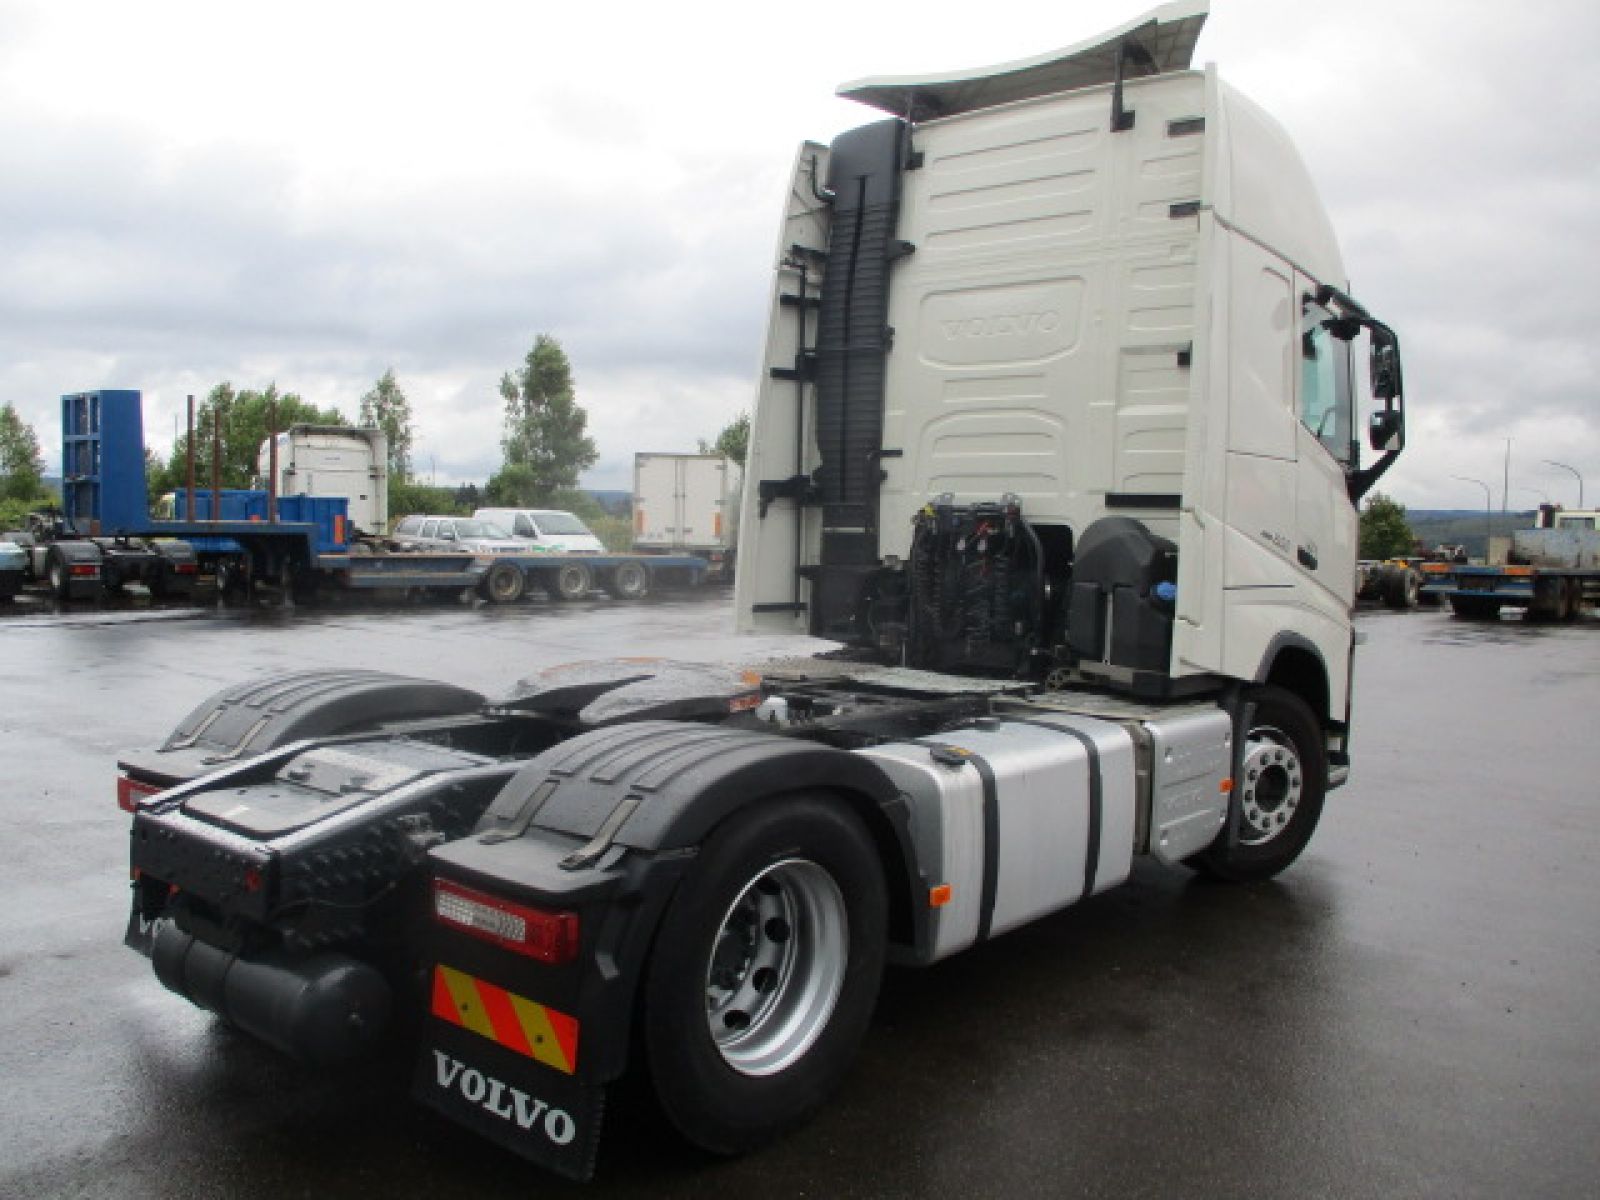 Vente occasion  Tracteur - VOLVO FH 500  TRACTEUR (Belgique - Europe) - Houffalize Trading s.a.